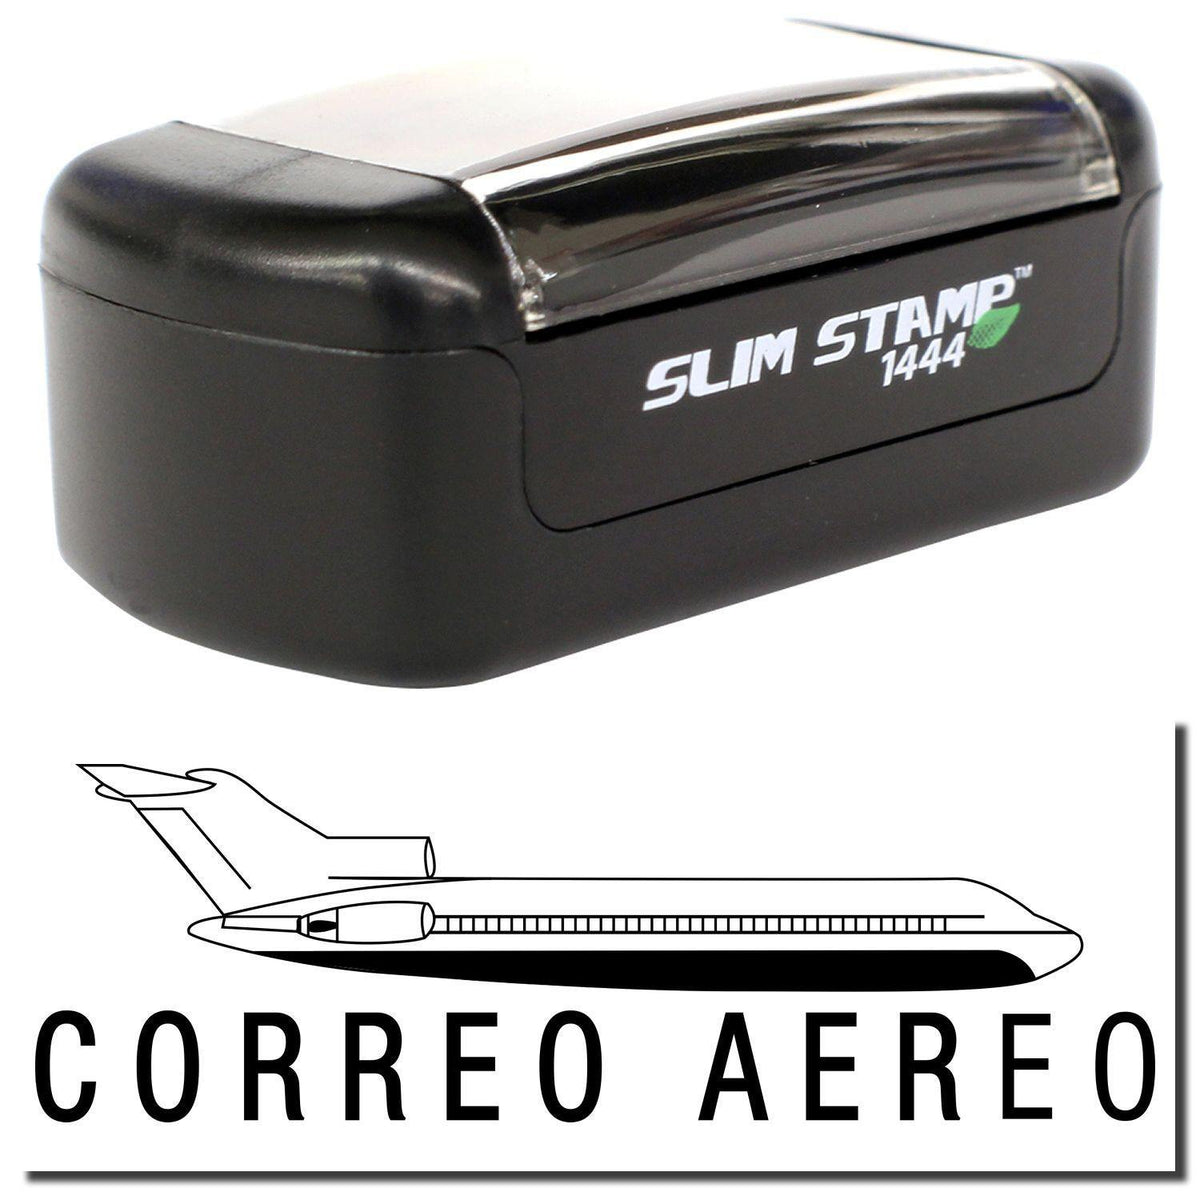 A stock office pre-inked stamp with a stamped image showing how the text &quot;CORREO AEREO&quot; is displayed after stamping.